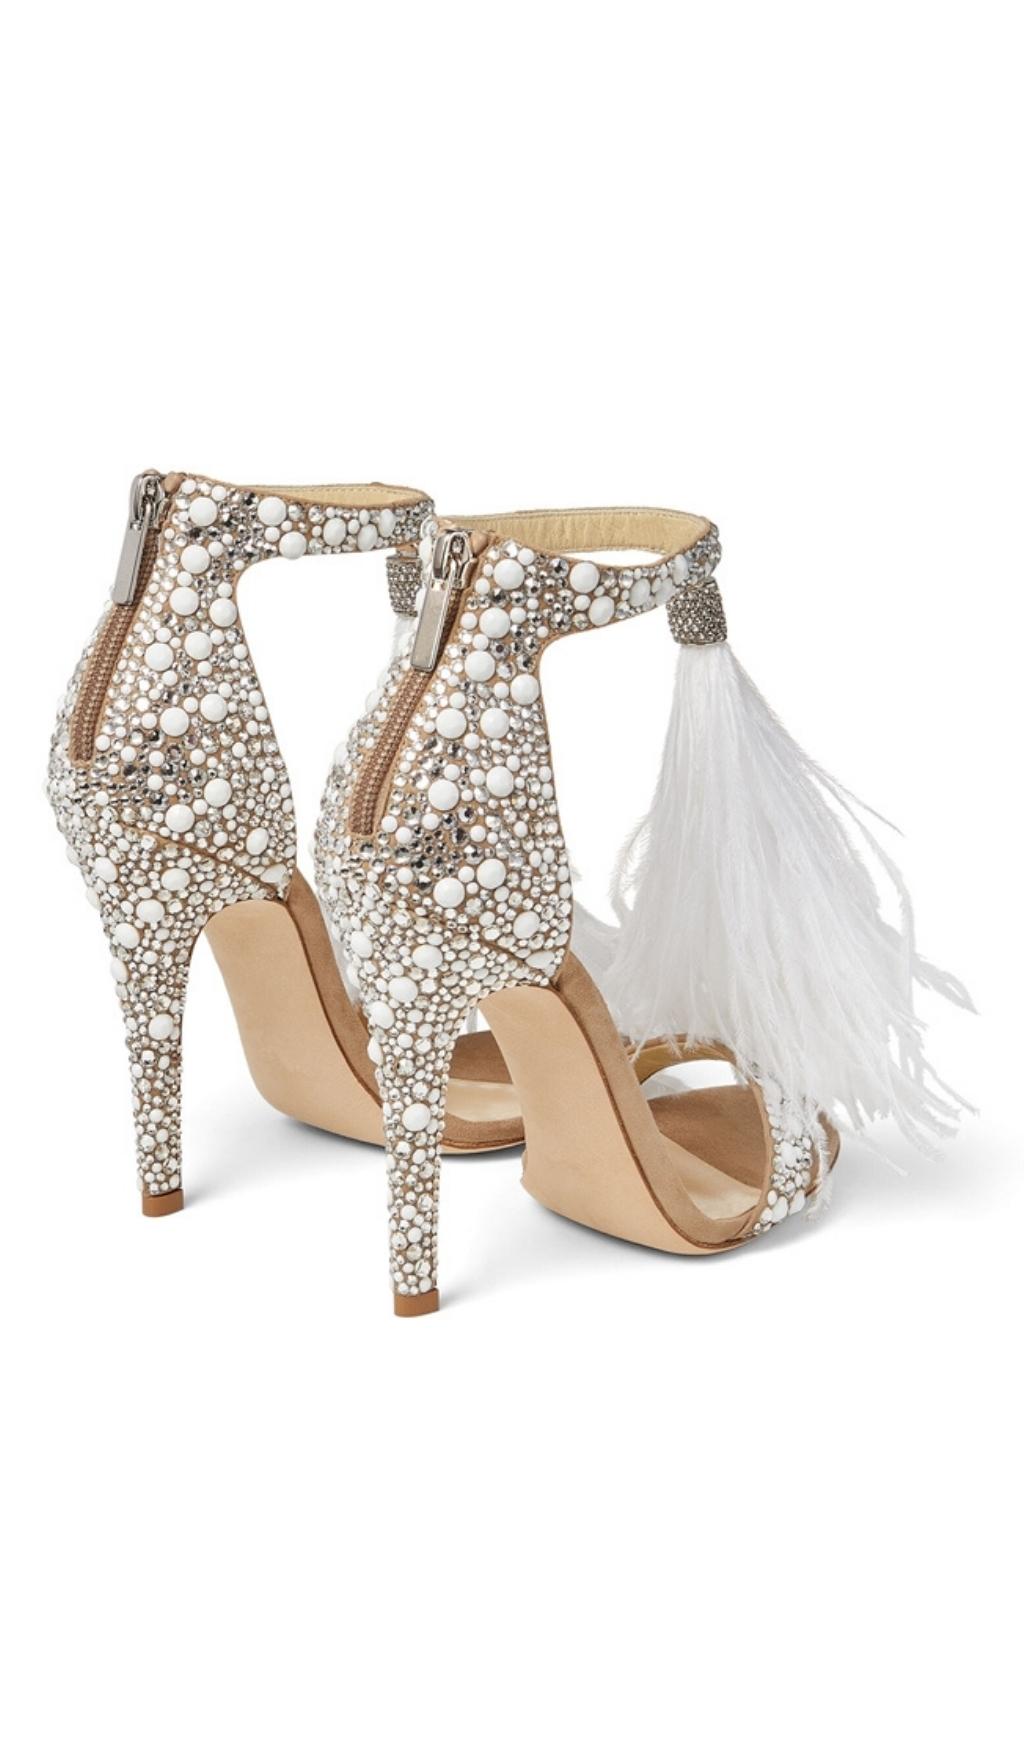 FeaTher Pearl StiLetto High Heels